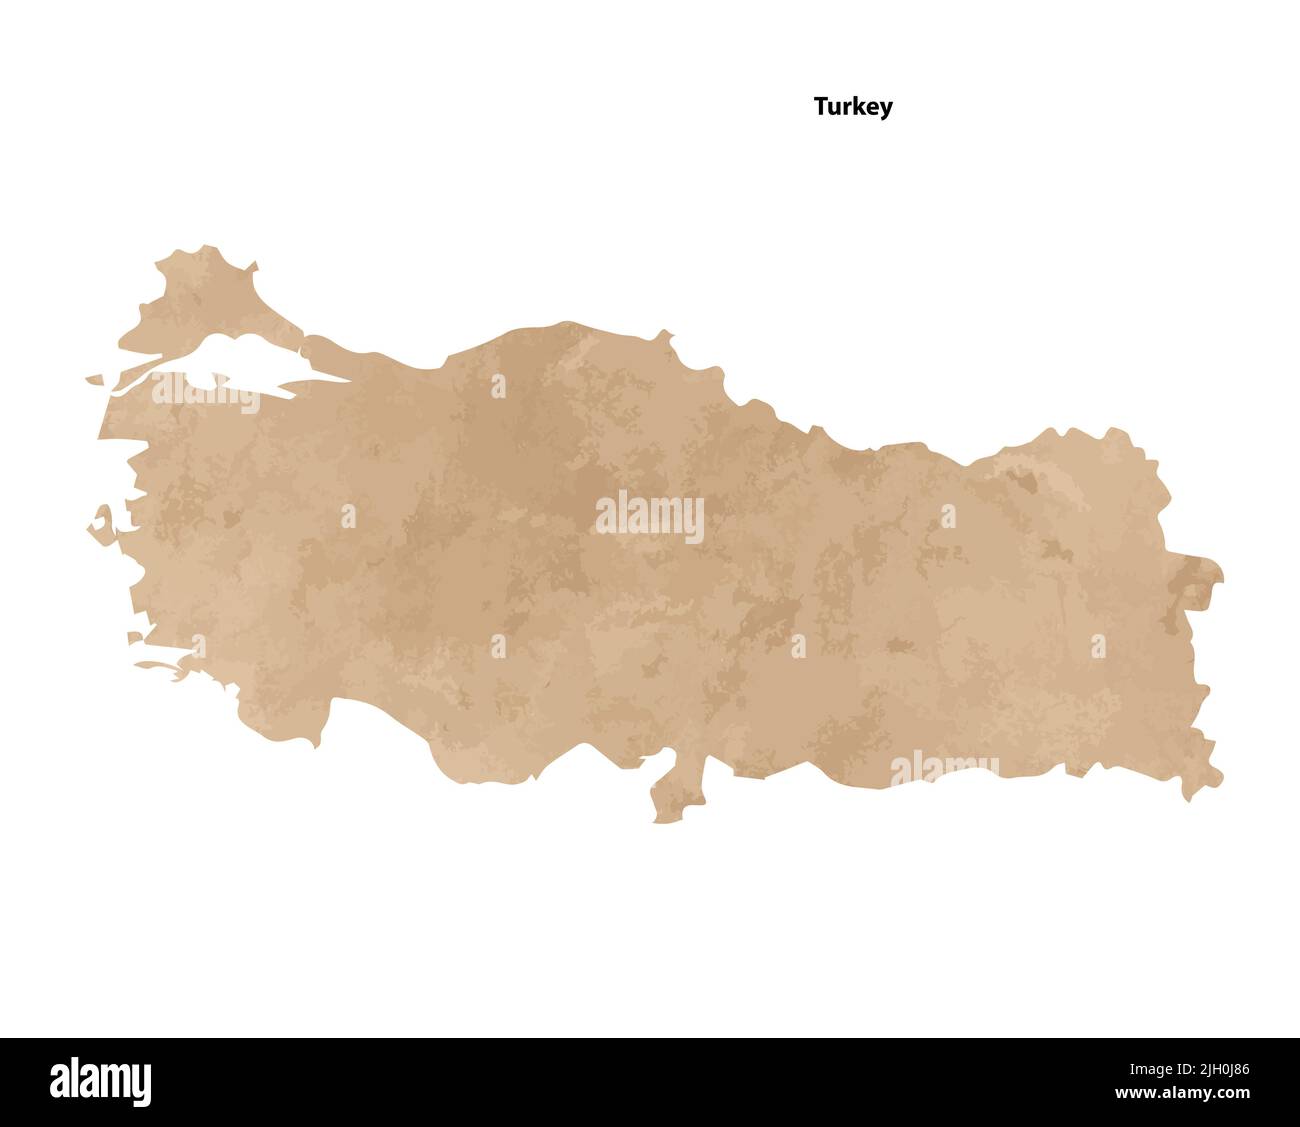 Old vintage paper textured map of Turkey Country - Vector illustration Stock Vector